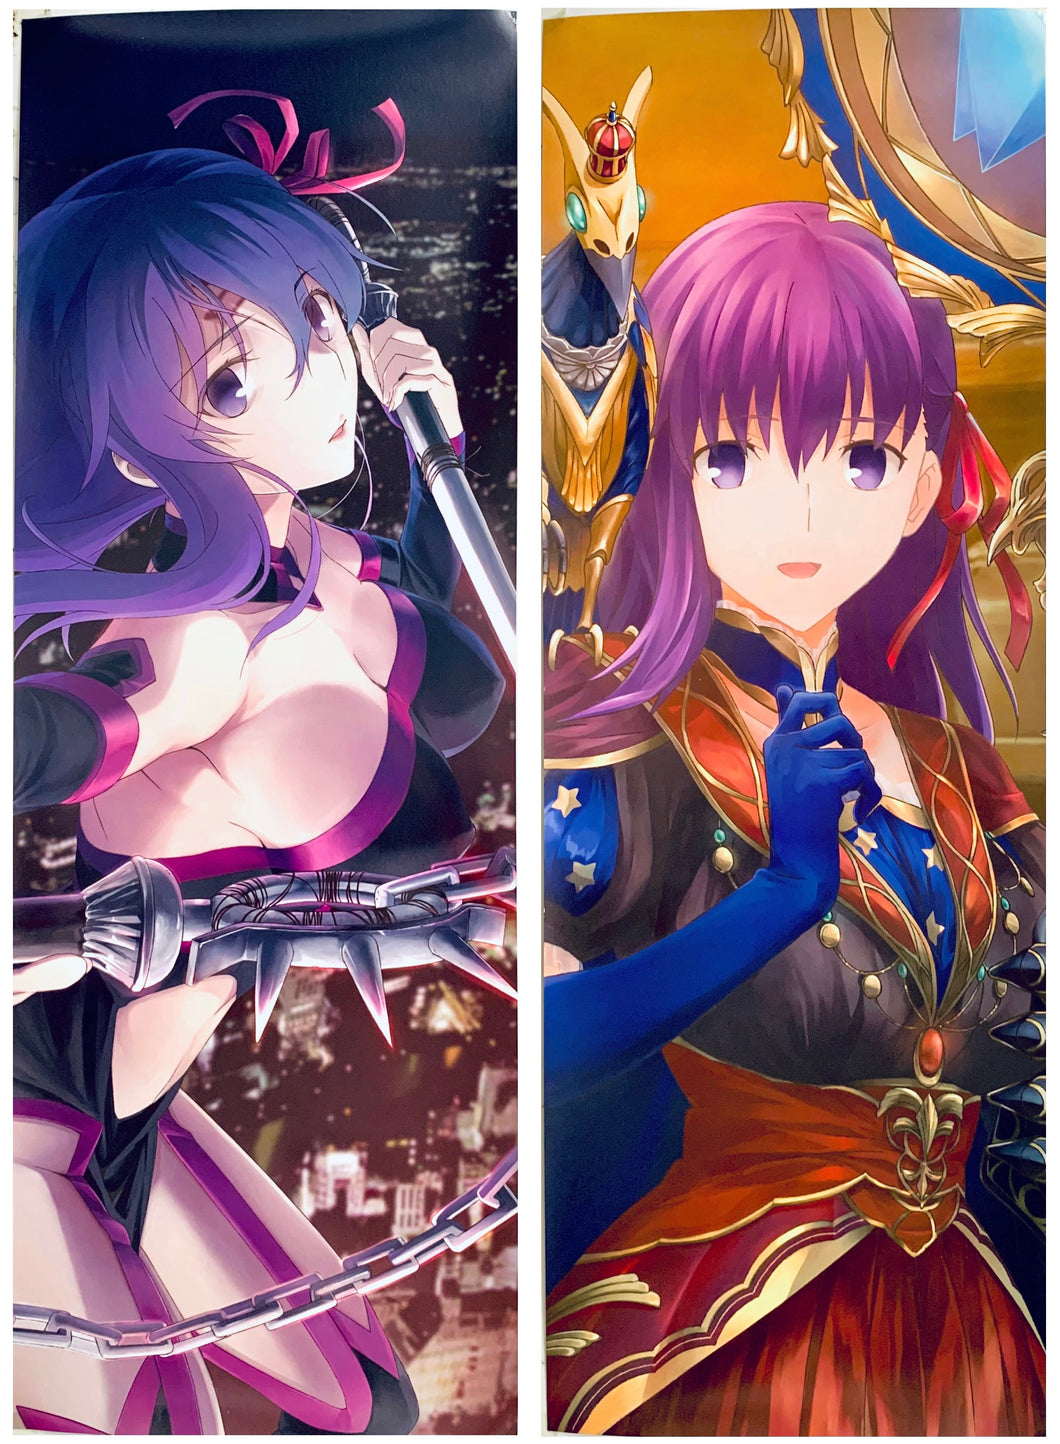 Gekijouban Fate/stay Night Heaven's Feel - Matou Sakura & Medea - F/sn x F/GO Collaboration Poster Part 1 (2 pieces set) - 4th Week Visitor Special